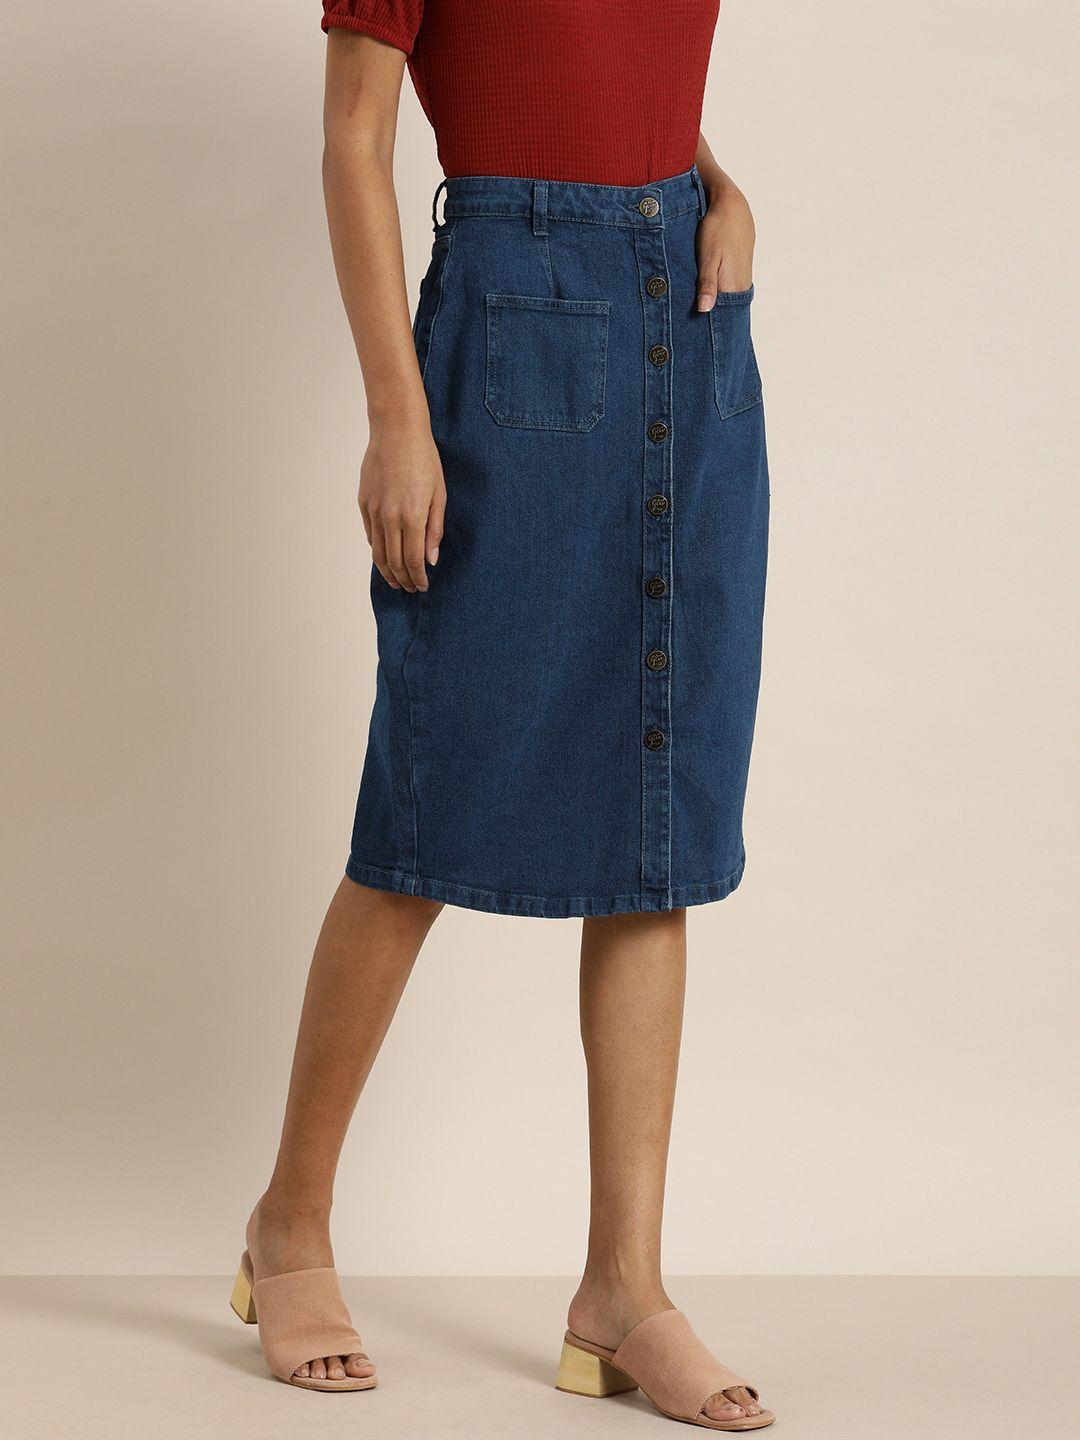 all about you indigo high-rise clean look skirt